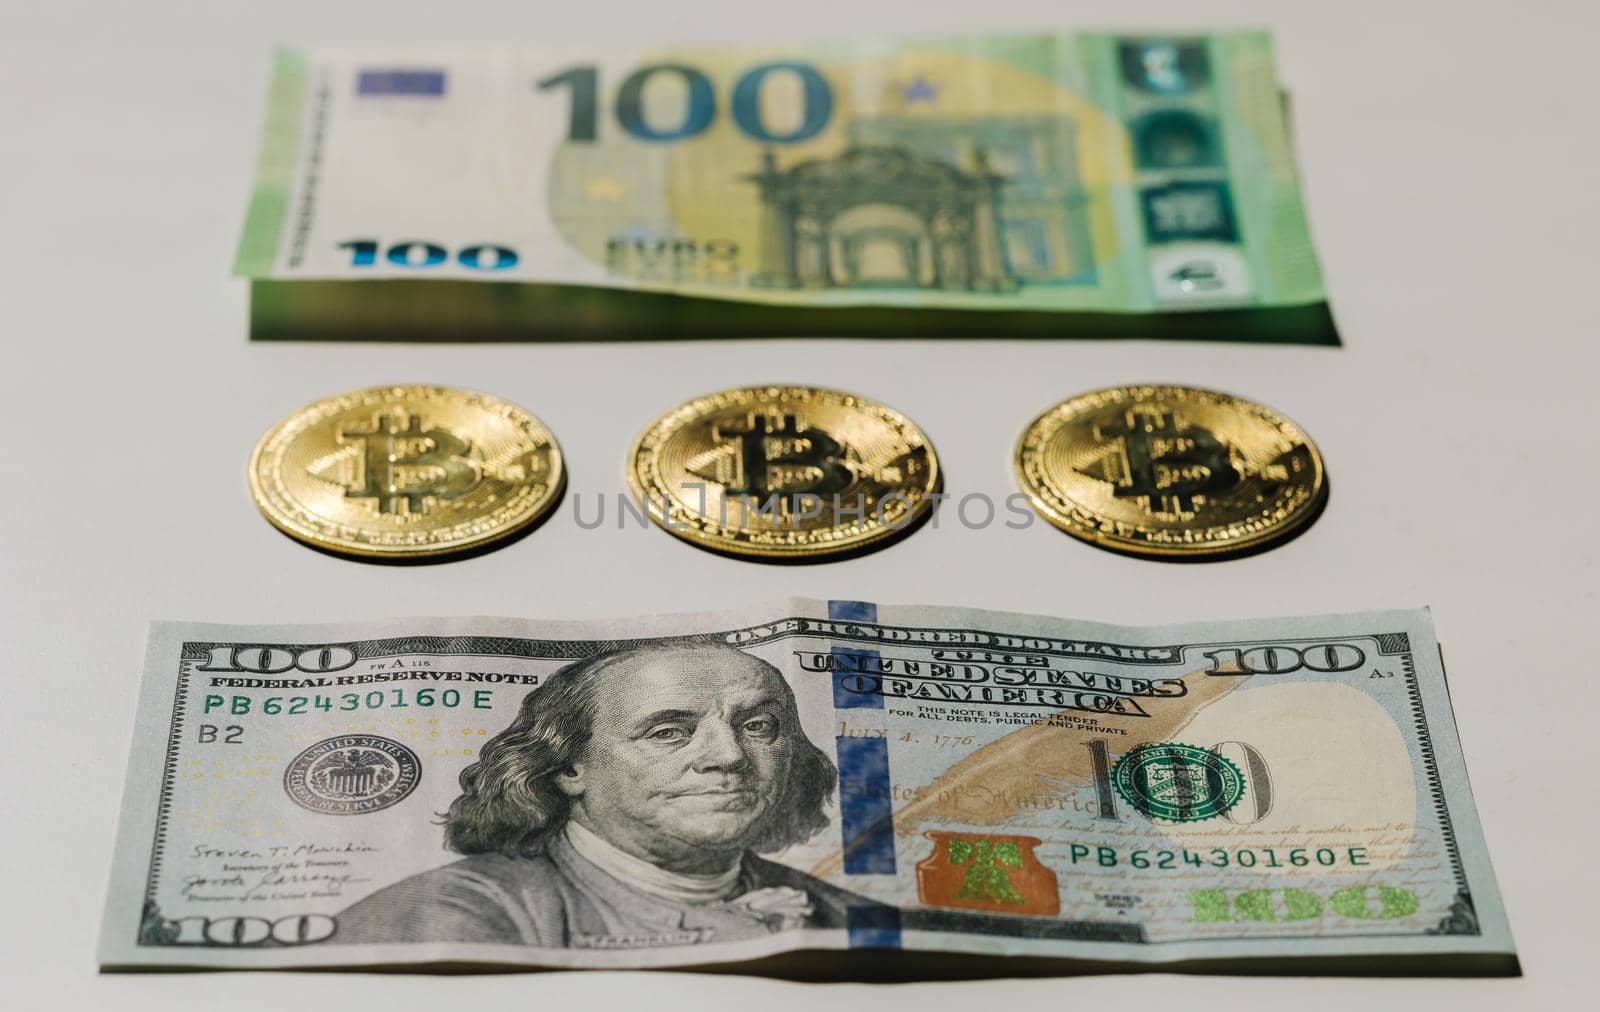 Digital cryptocurrency gold bitcoin lying between US Dollar and Euro banknotes. Difference between virtual money and cash. Concept of new virtual money.